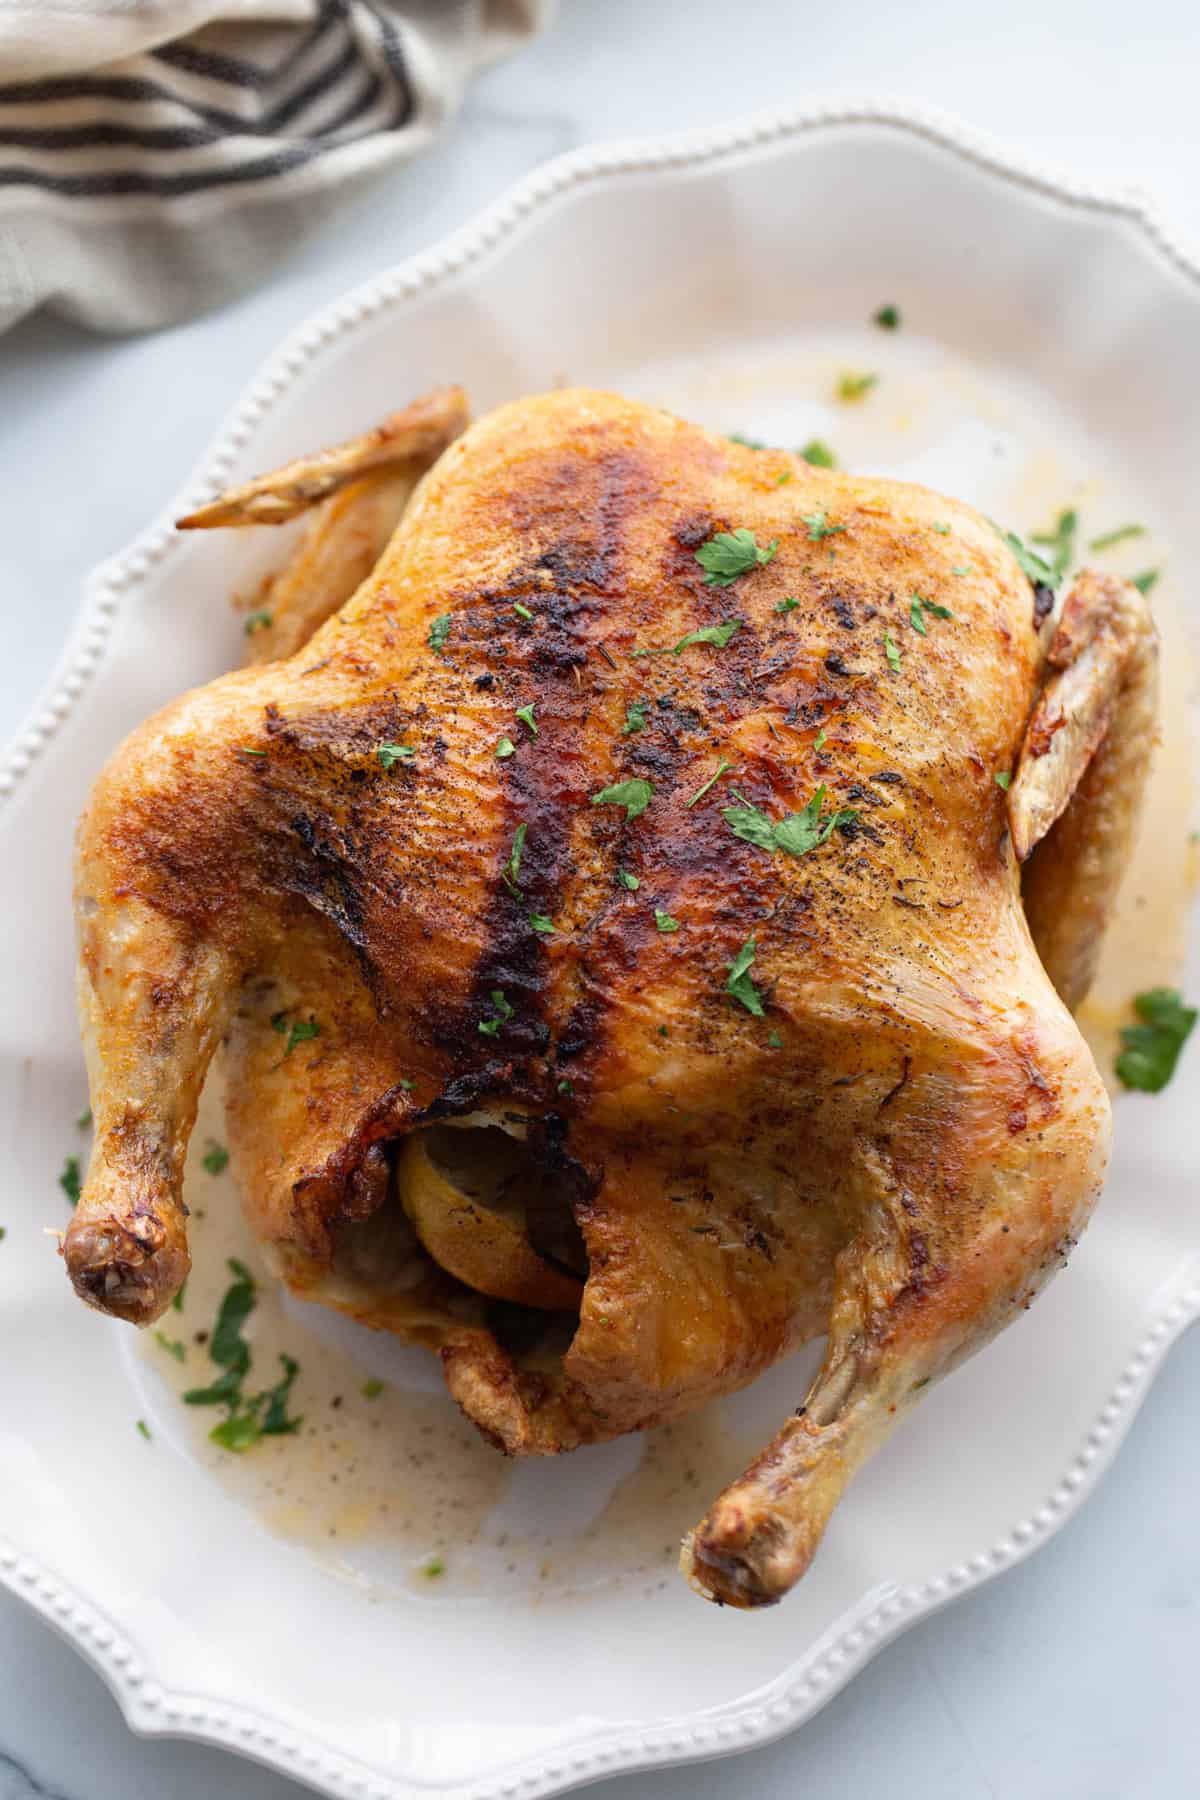 A cooked whole chicken on a white plate garnished with fresh herbs.